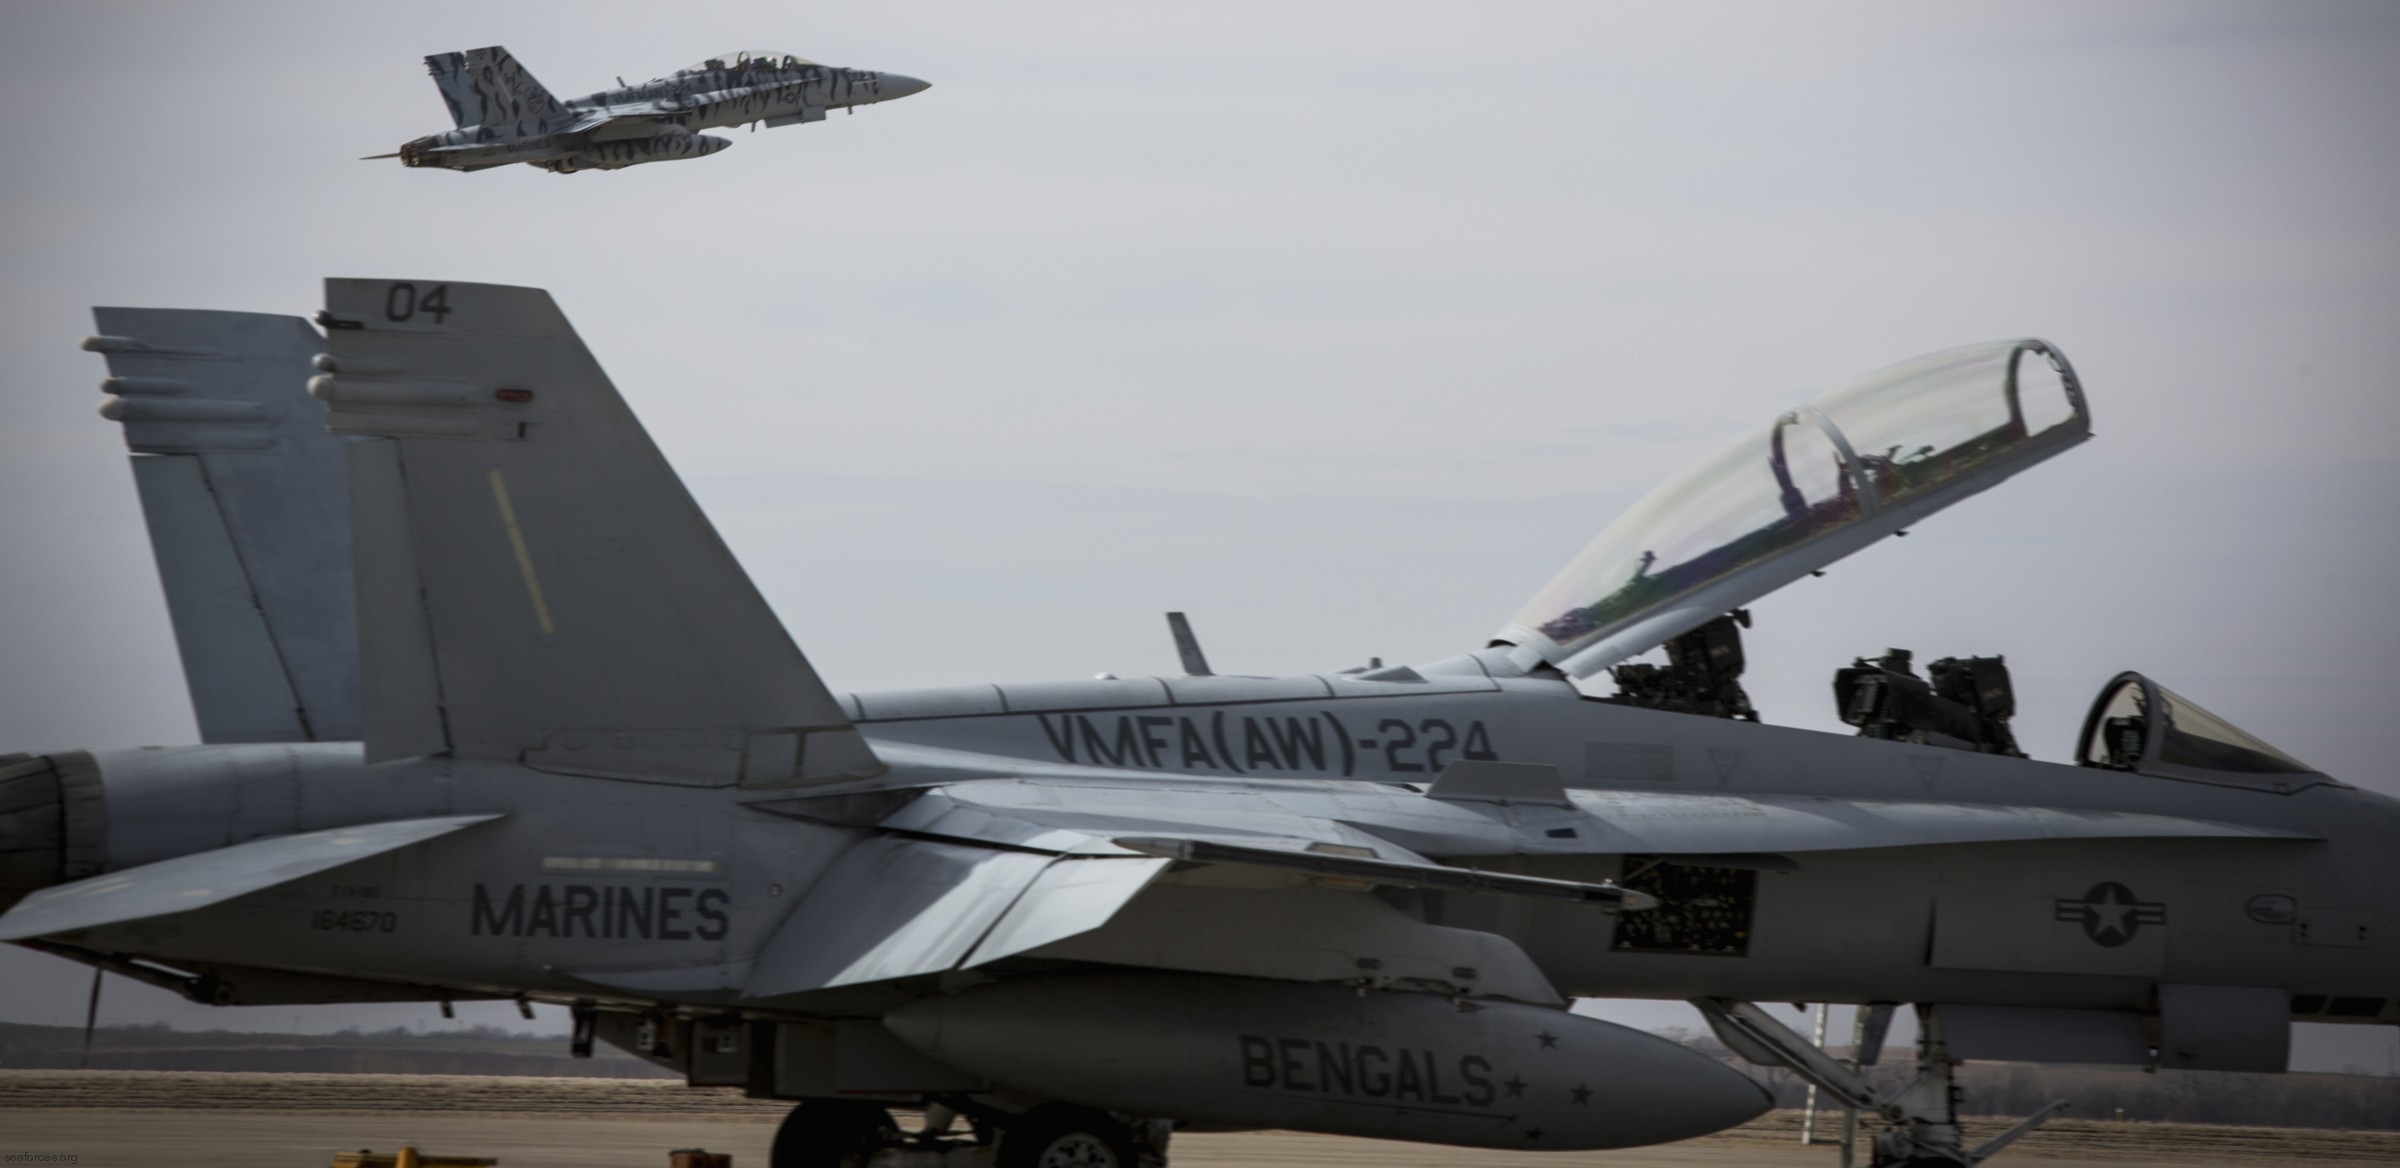 vmfa(aw)-224 bengals marine fighter attack squadron usmc f/a-18d hornet 56